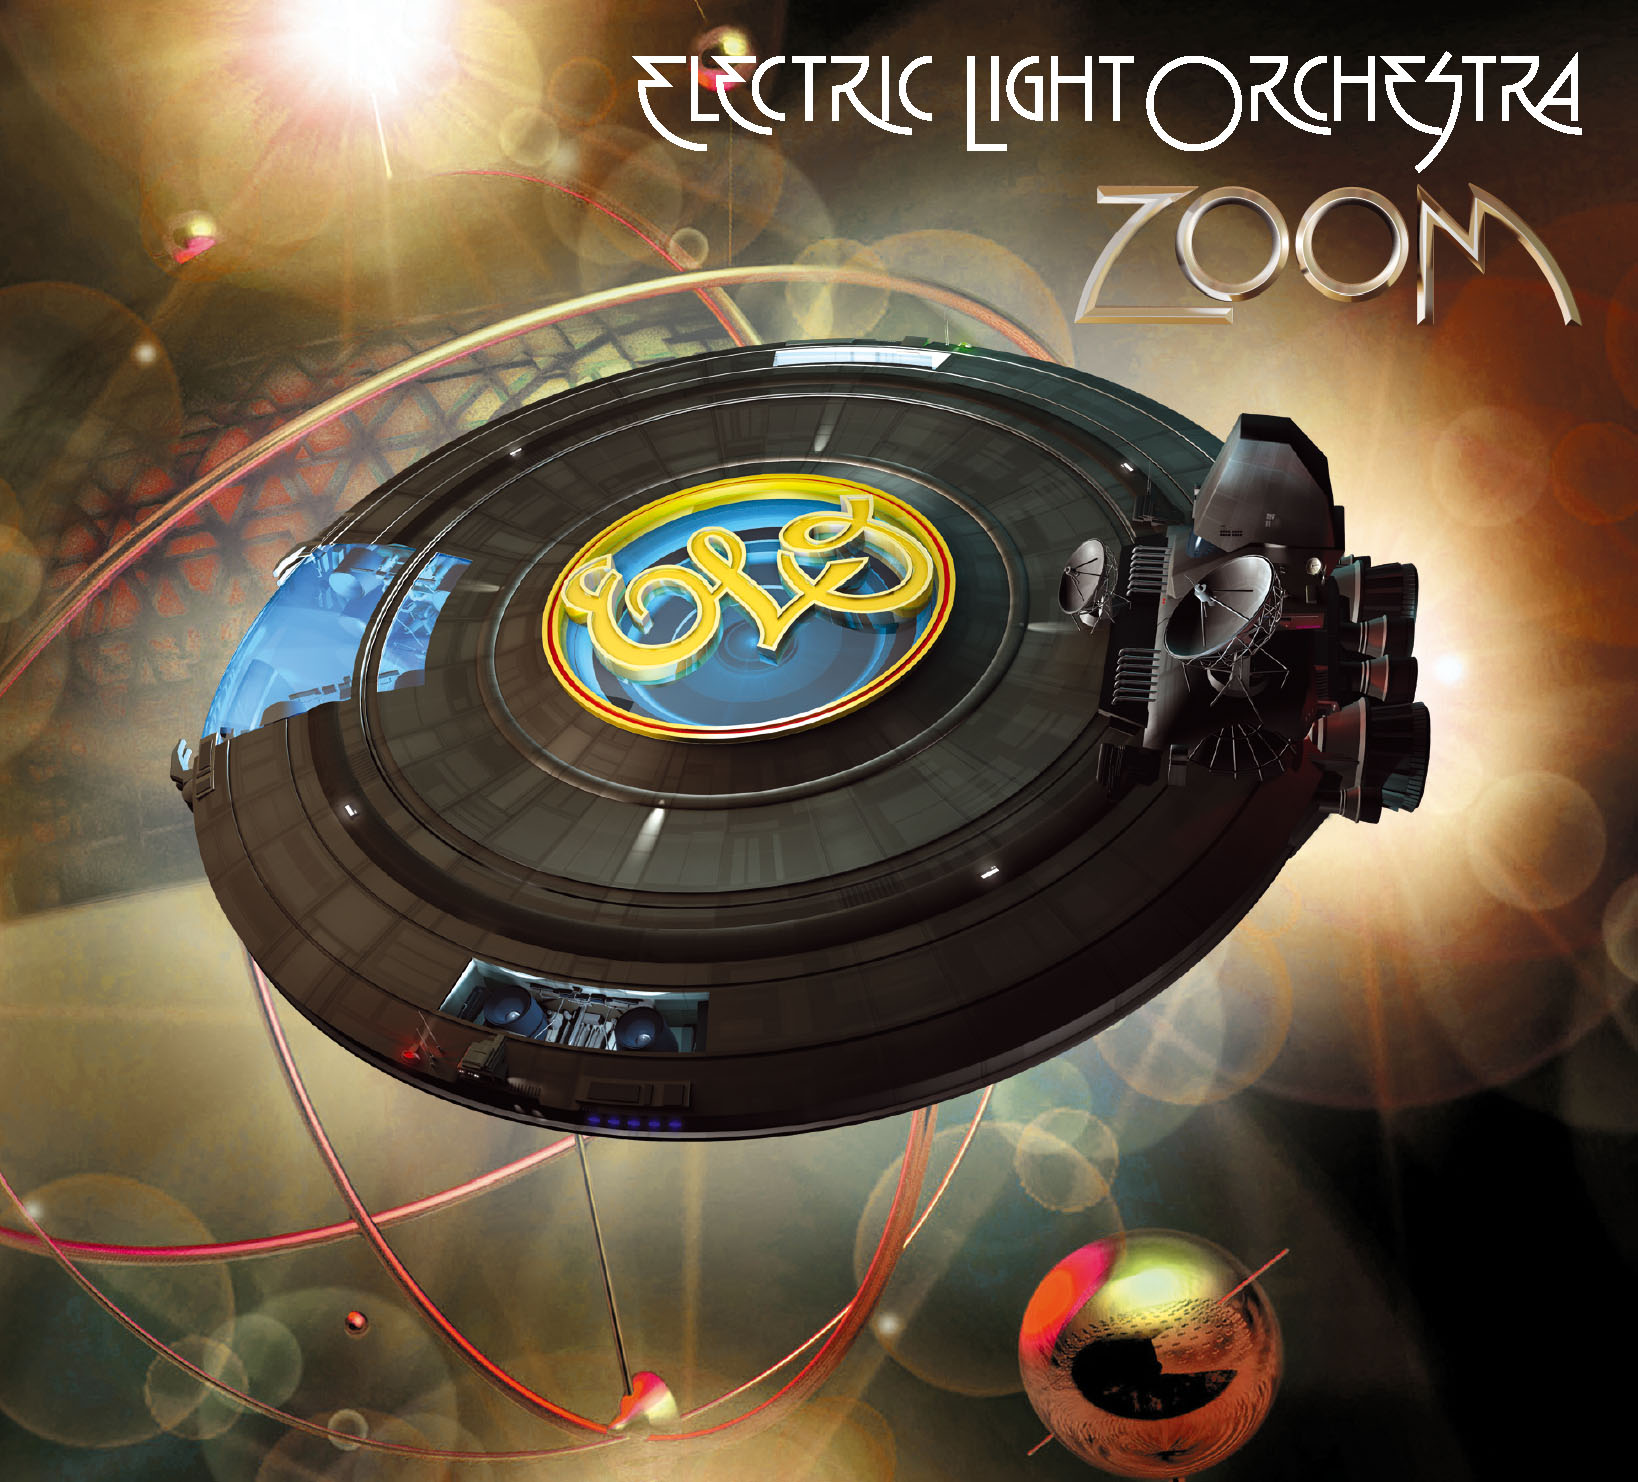 Elo electric light orchestra